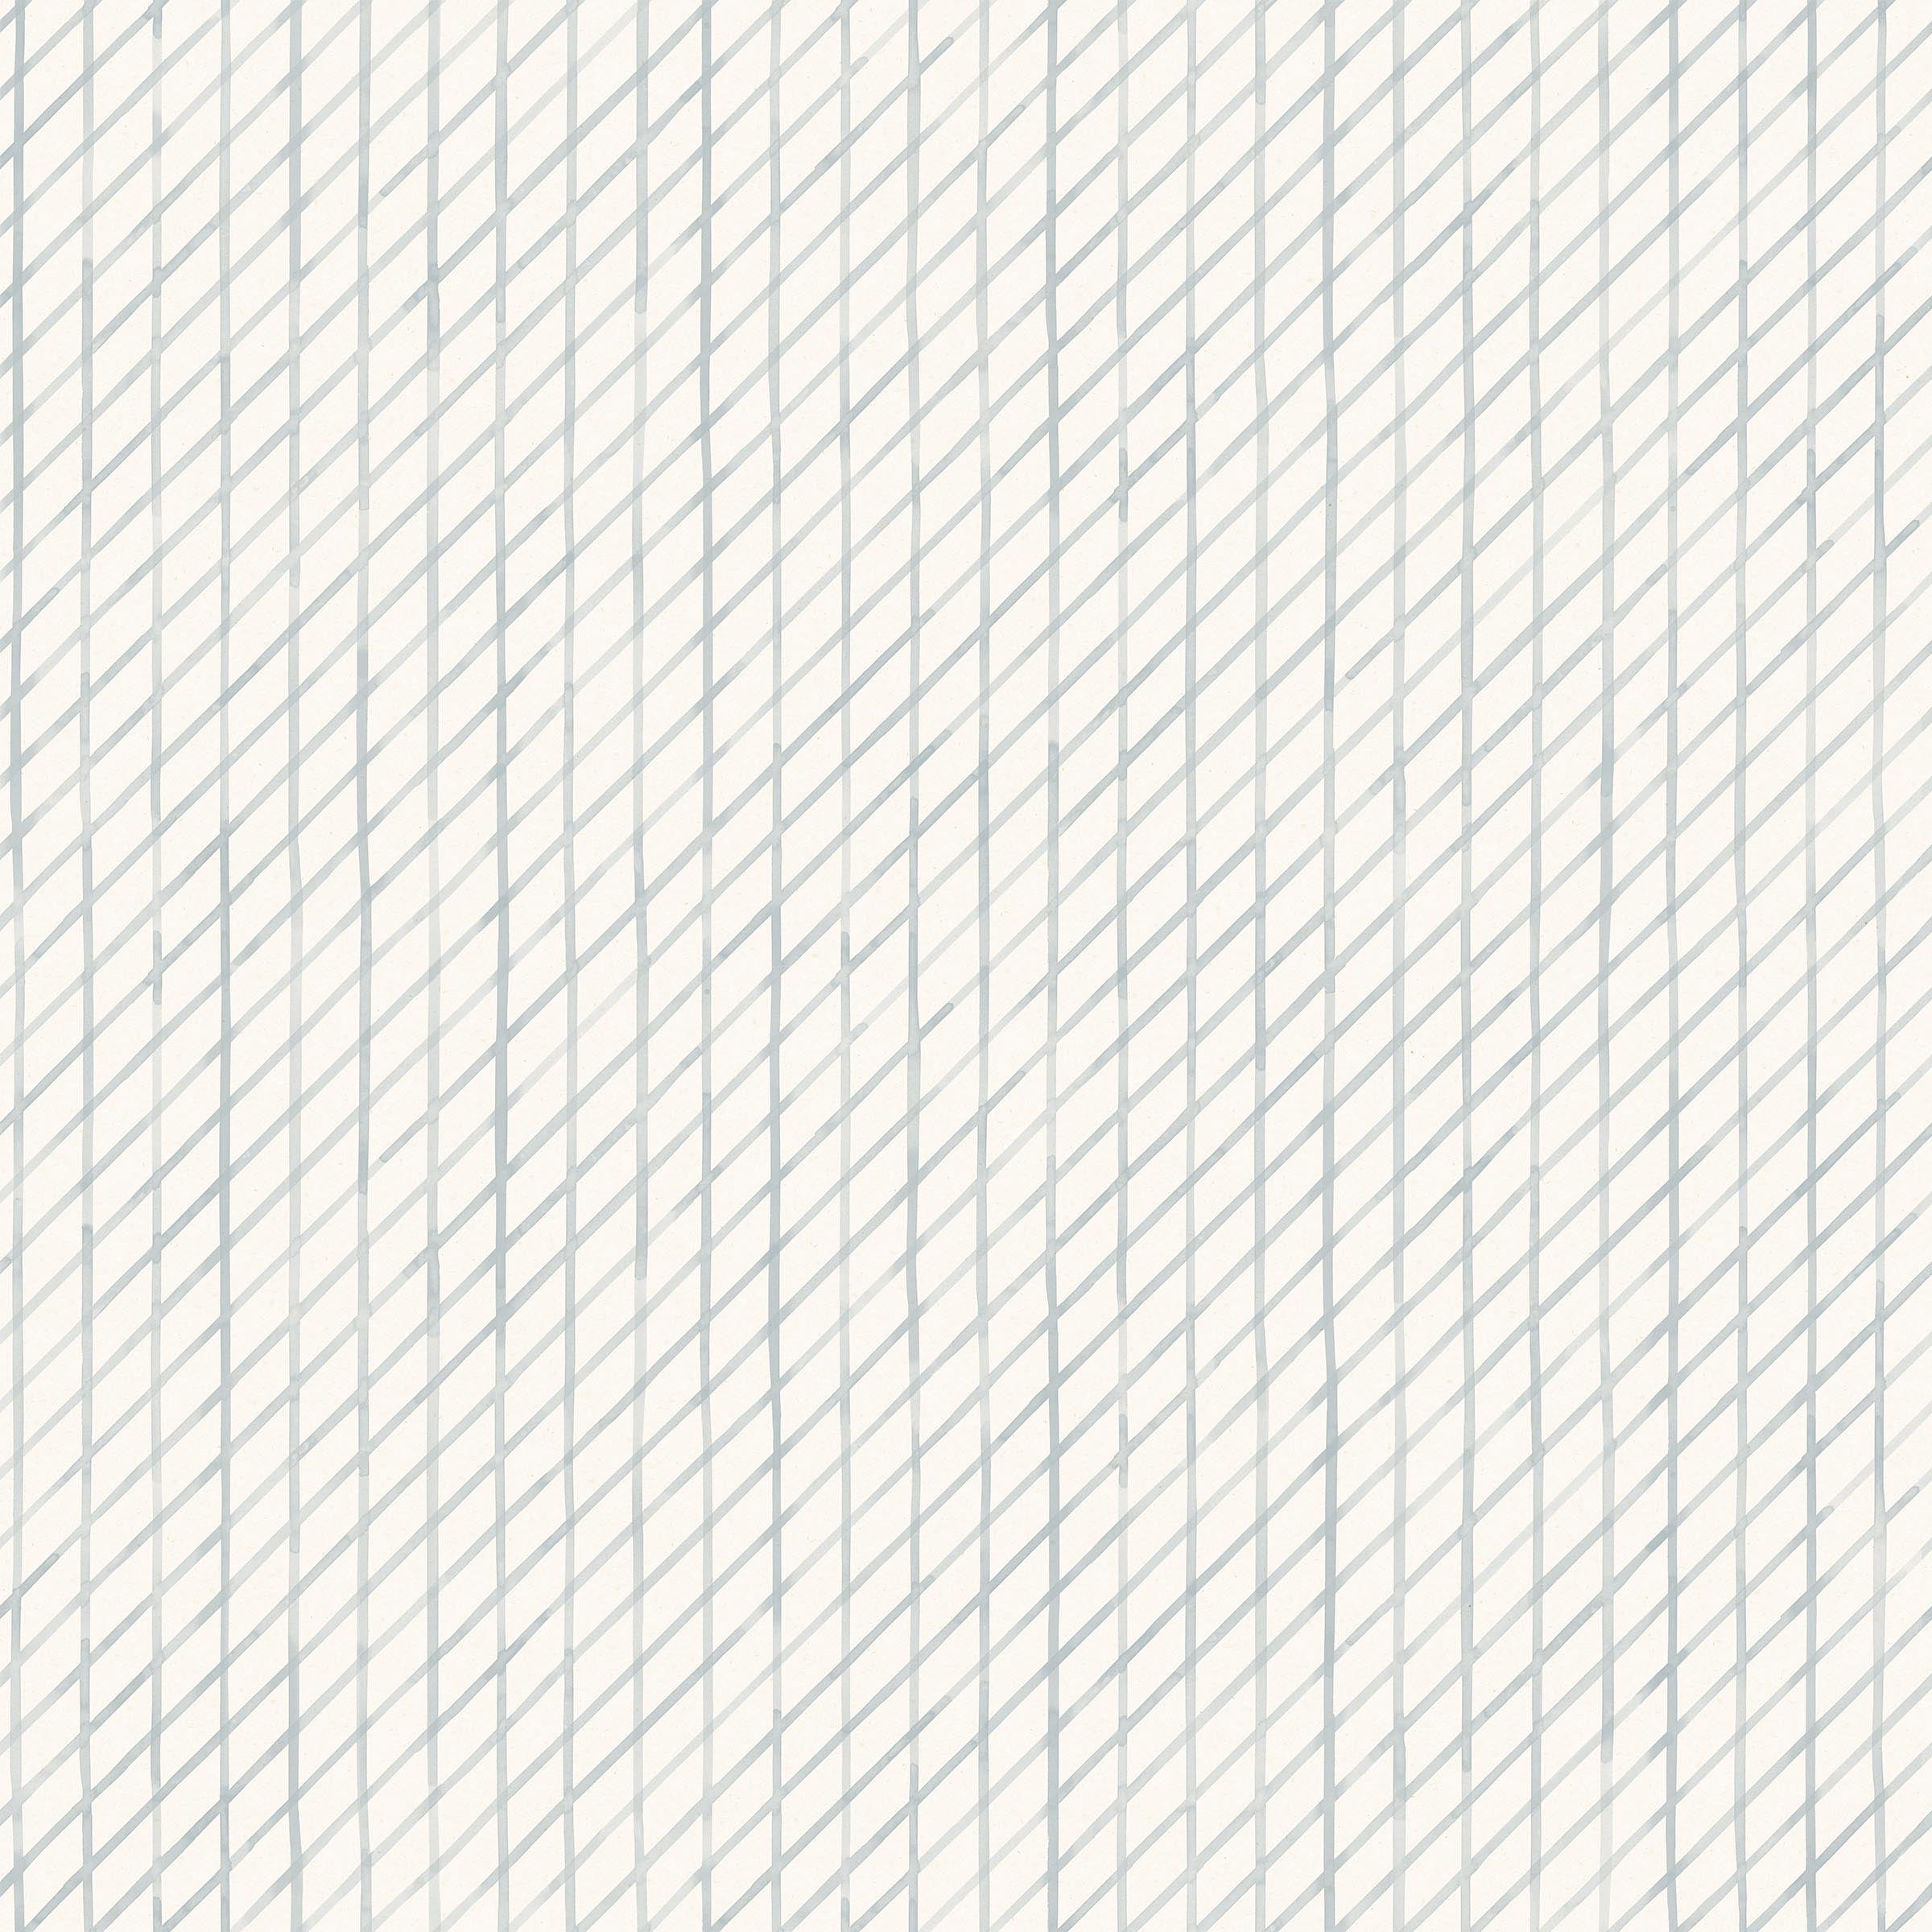 Detail of wallpaper in a painterly uneven grid pattern in light blue on a white field.